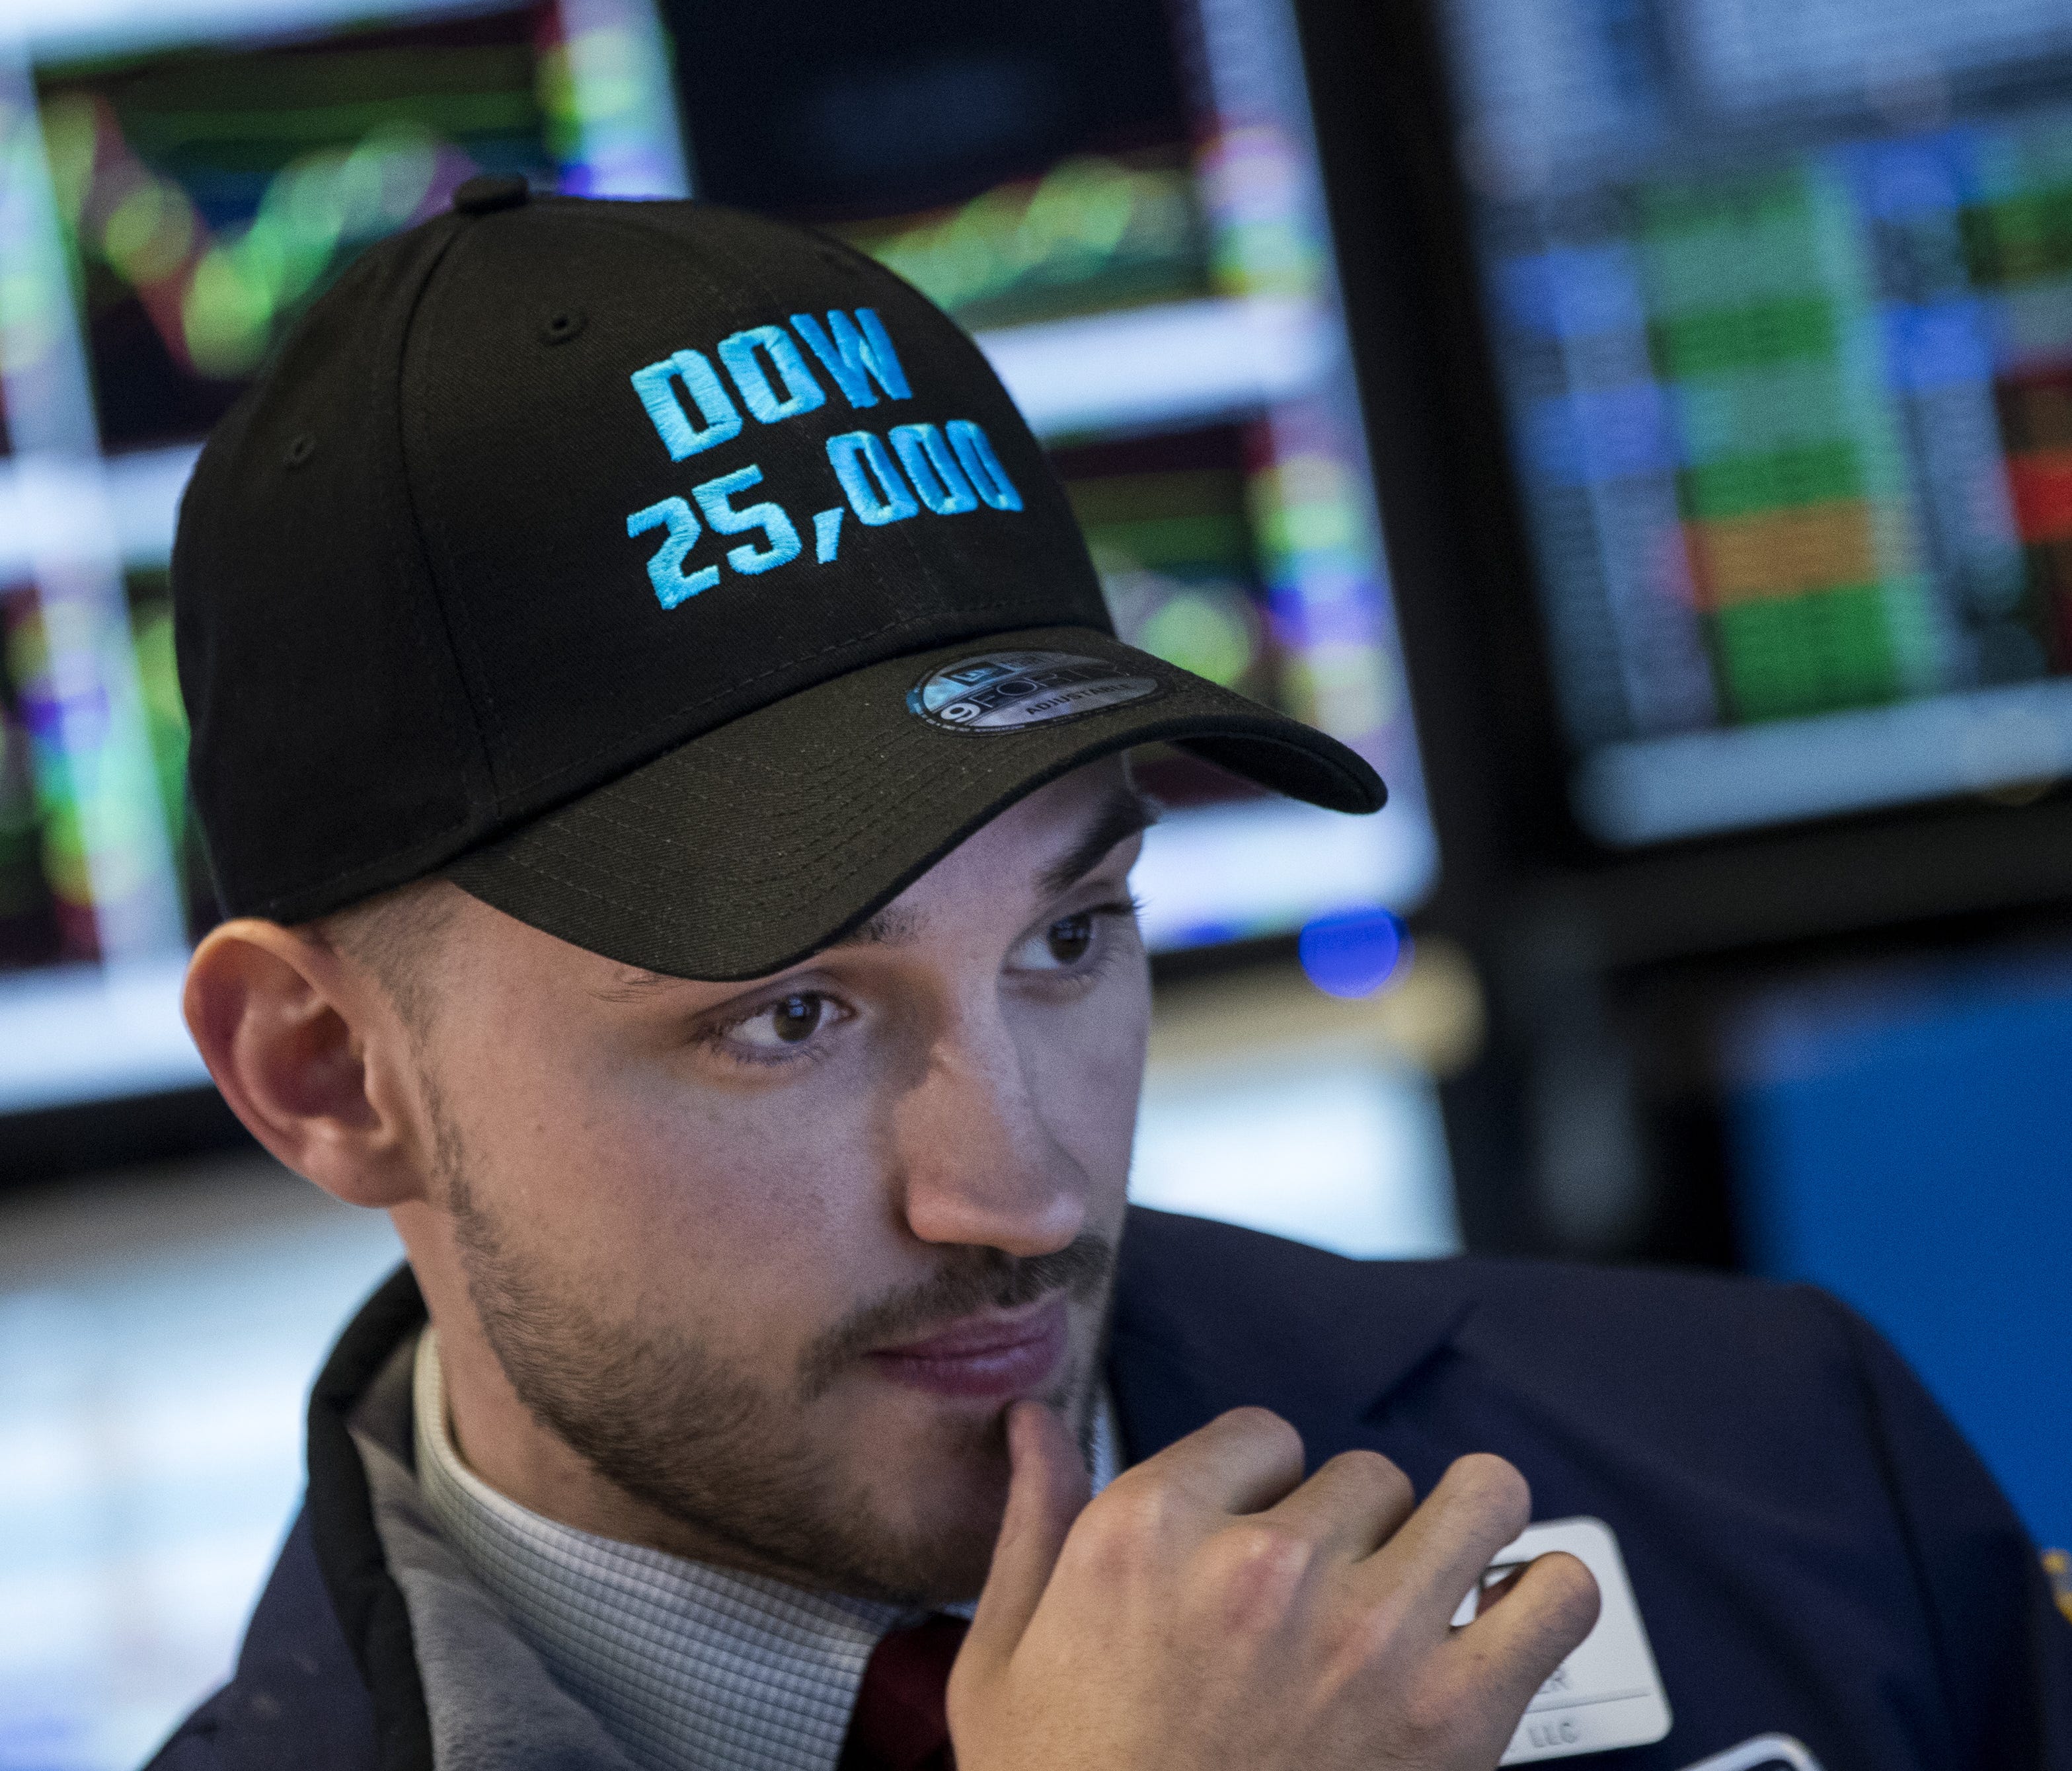 A trader wearing a 'Dow 25,000' hat works on the floor of the New York Stock Exchange (NYSE) ahead of the closing bell, January 4, 2018 in New York City. The Dow closed above 25,000 for the first time ever on Thursday.